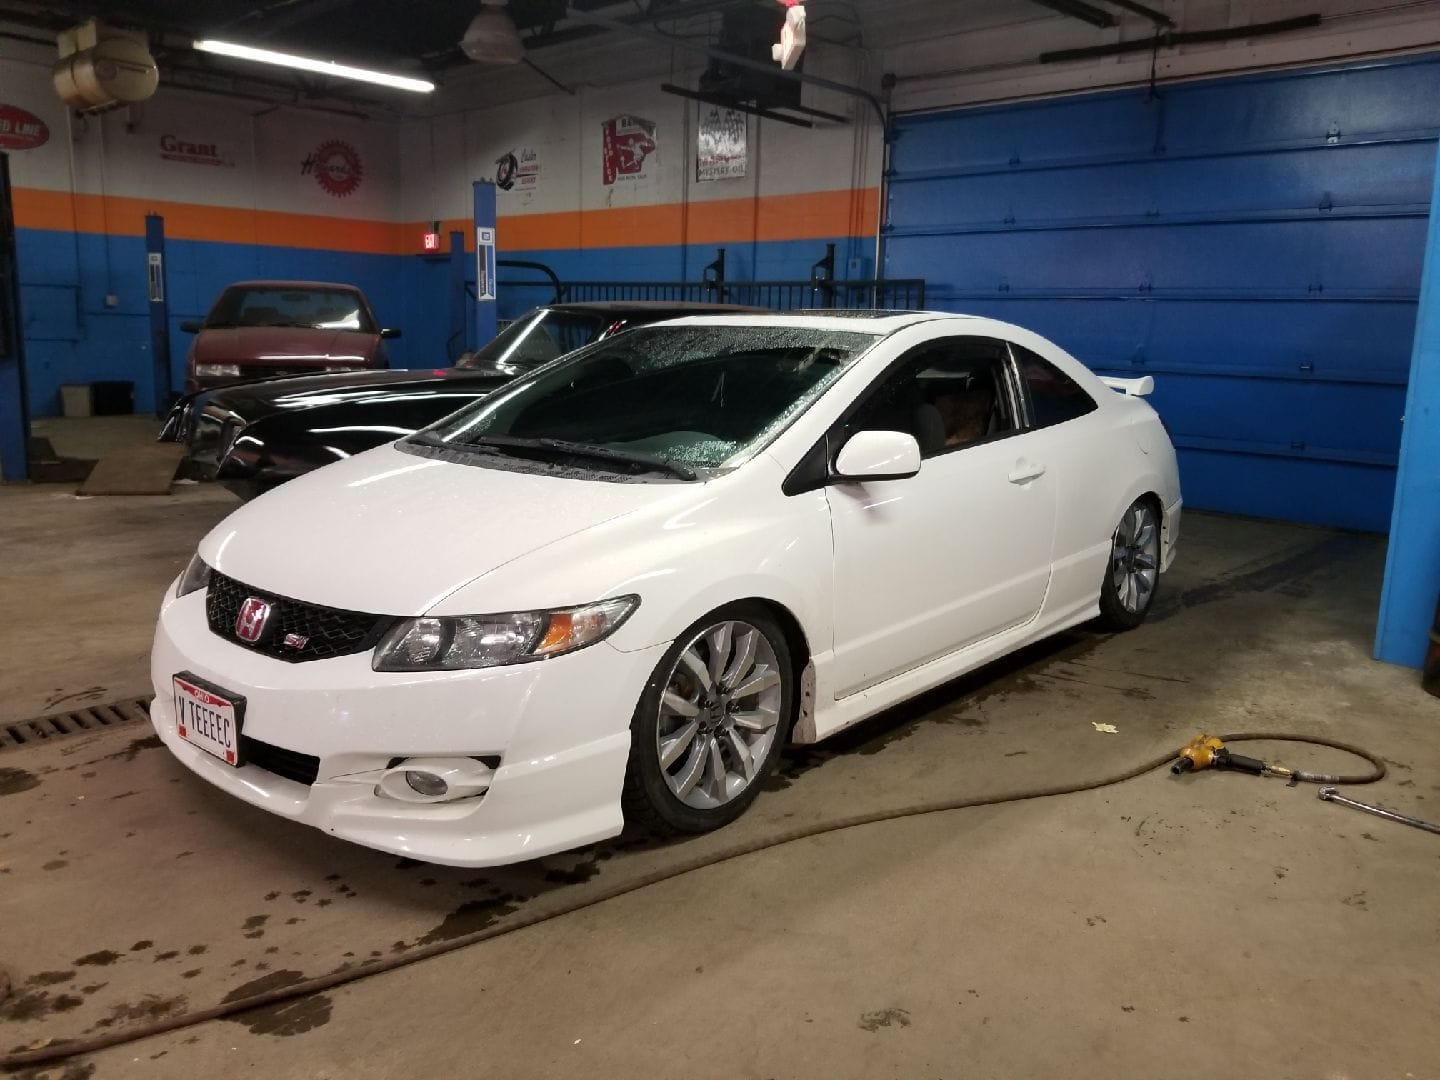 2009 Honda Civic - 2009 Civic SI - Used - VIN 2HGFG2159H702690 - 90,500 Miles - 4 cyl - 2WD - Manual - Coupe - White - Dublin, OH 43017, United States